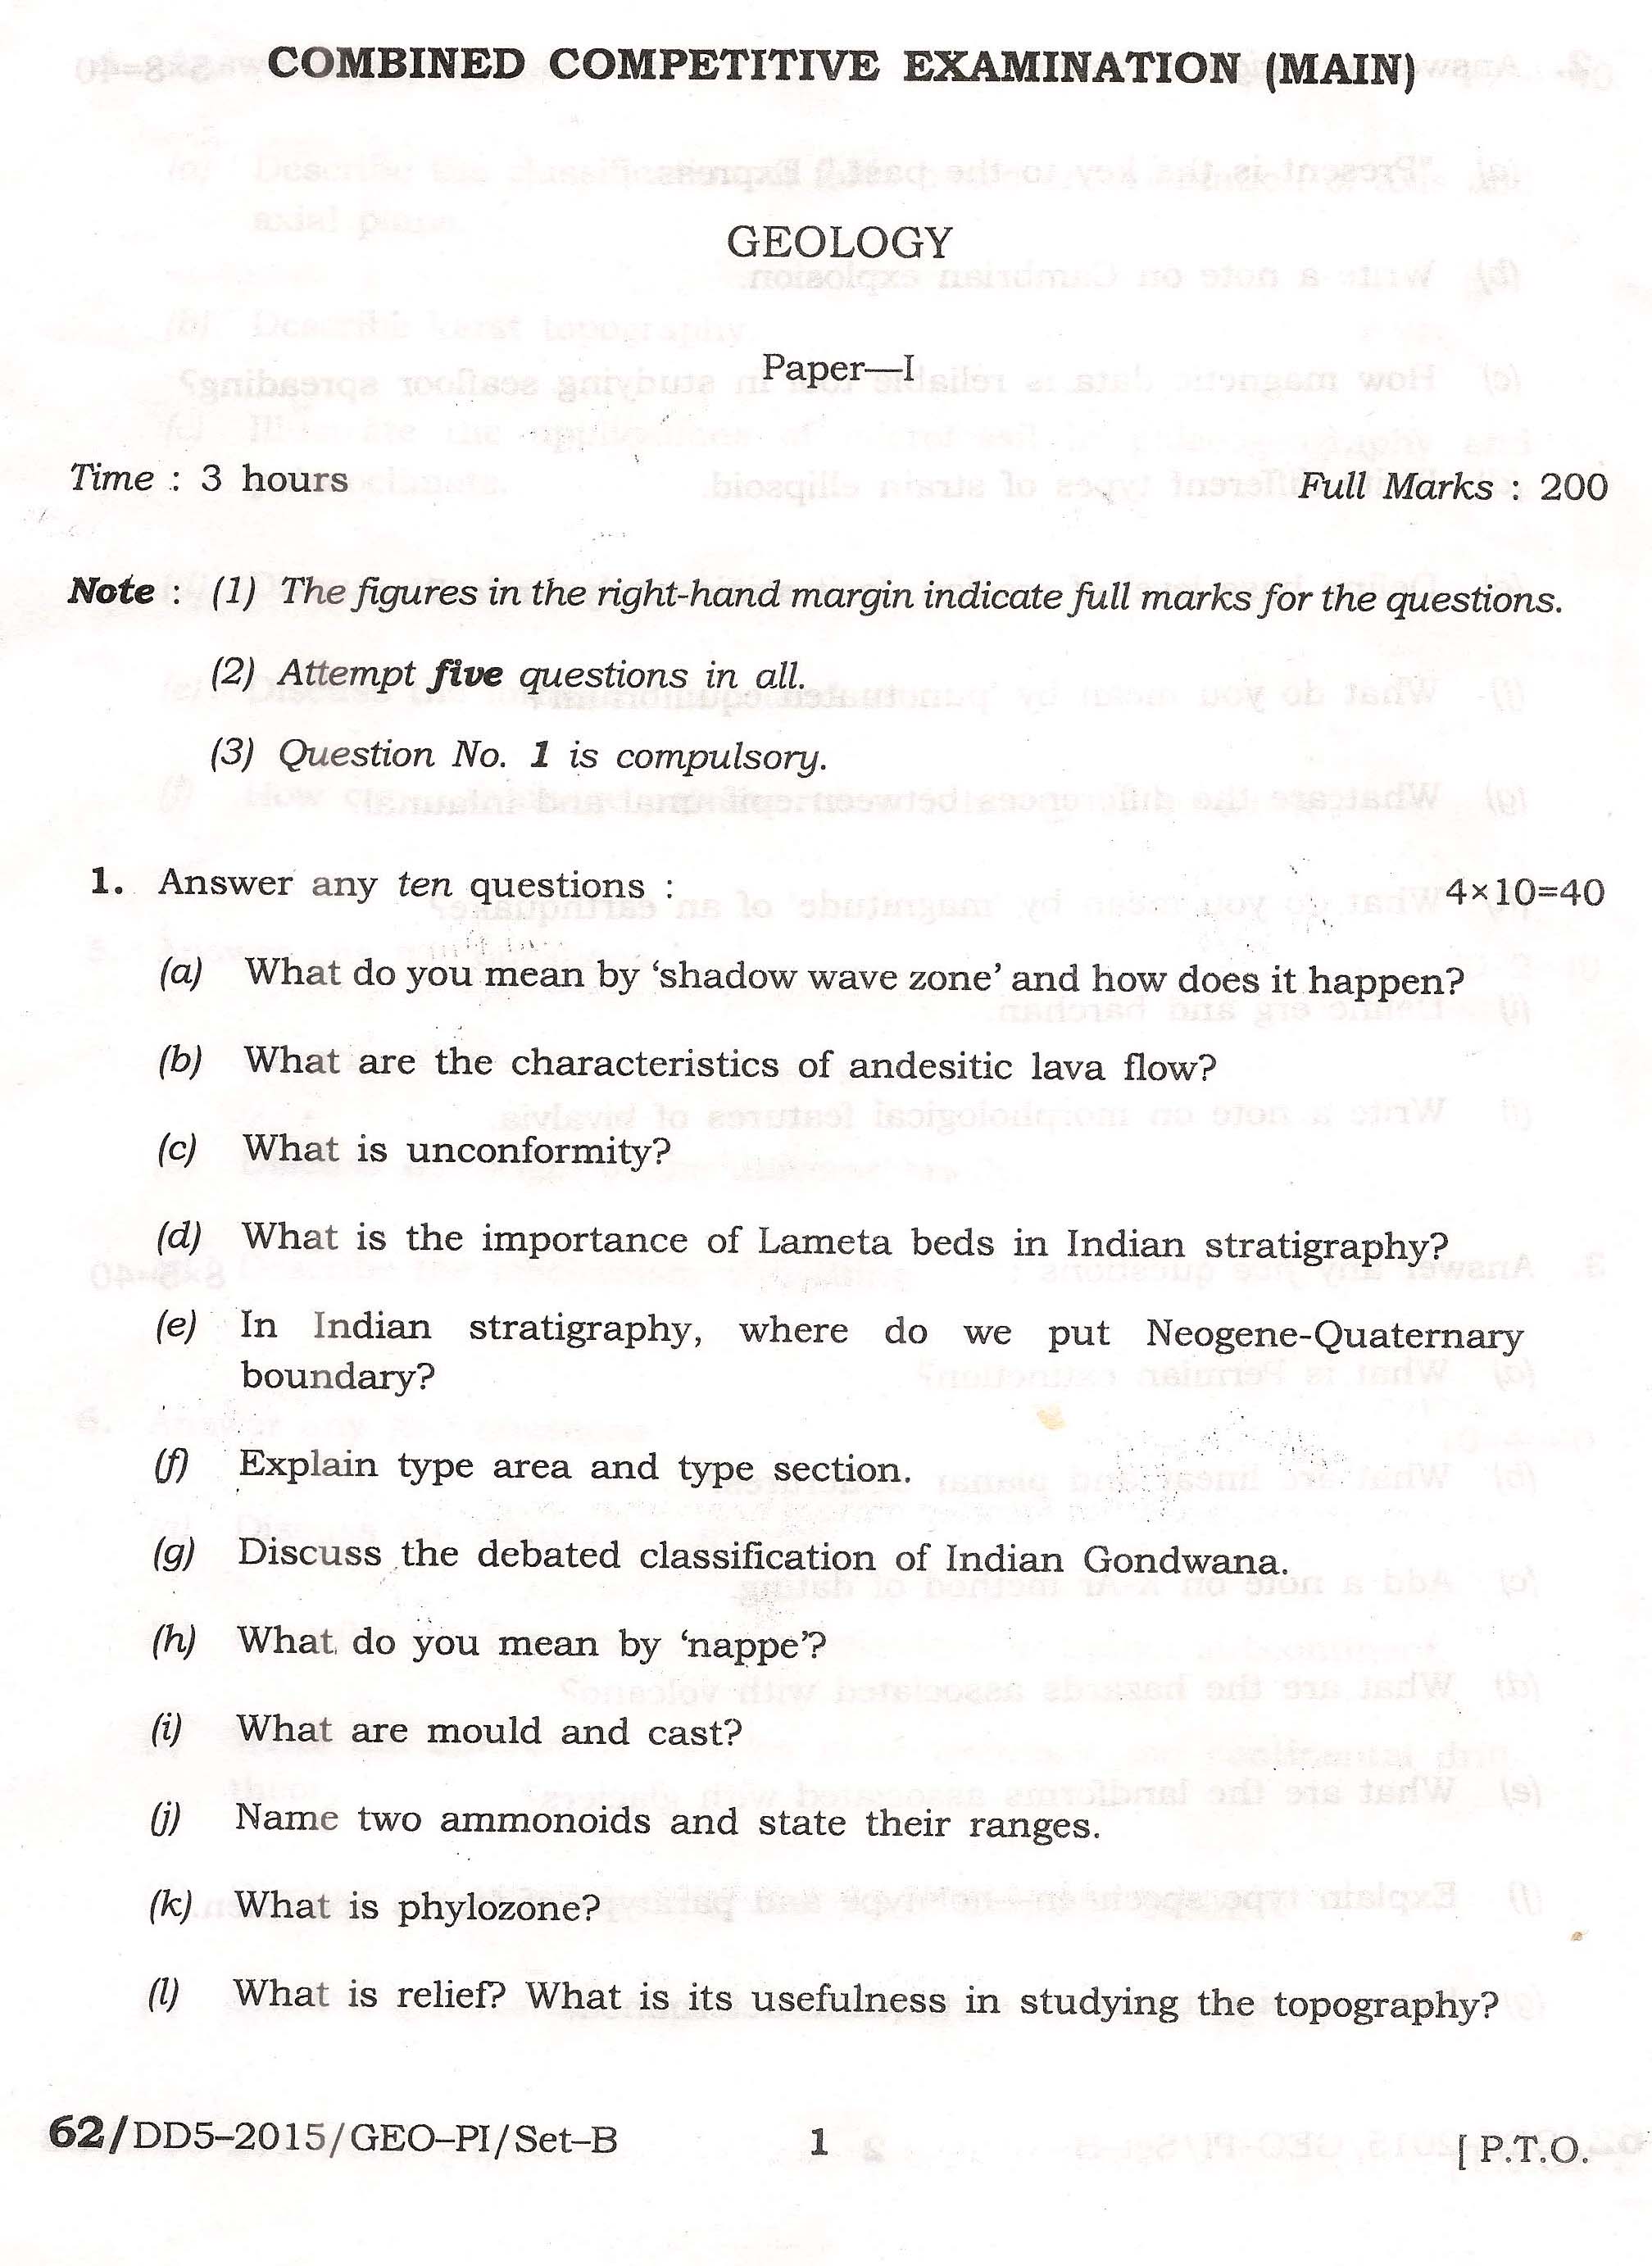 APPSC Combined Competitive Main Exam 2015 Geology Paper I 1